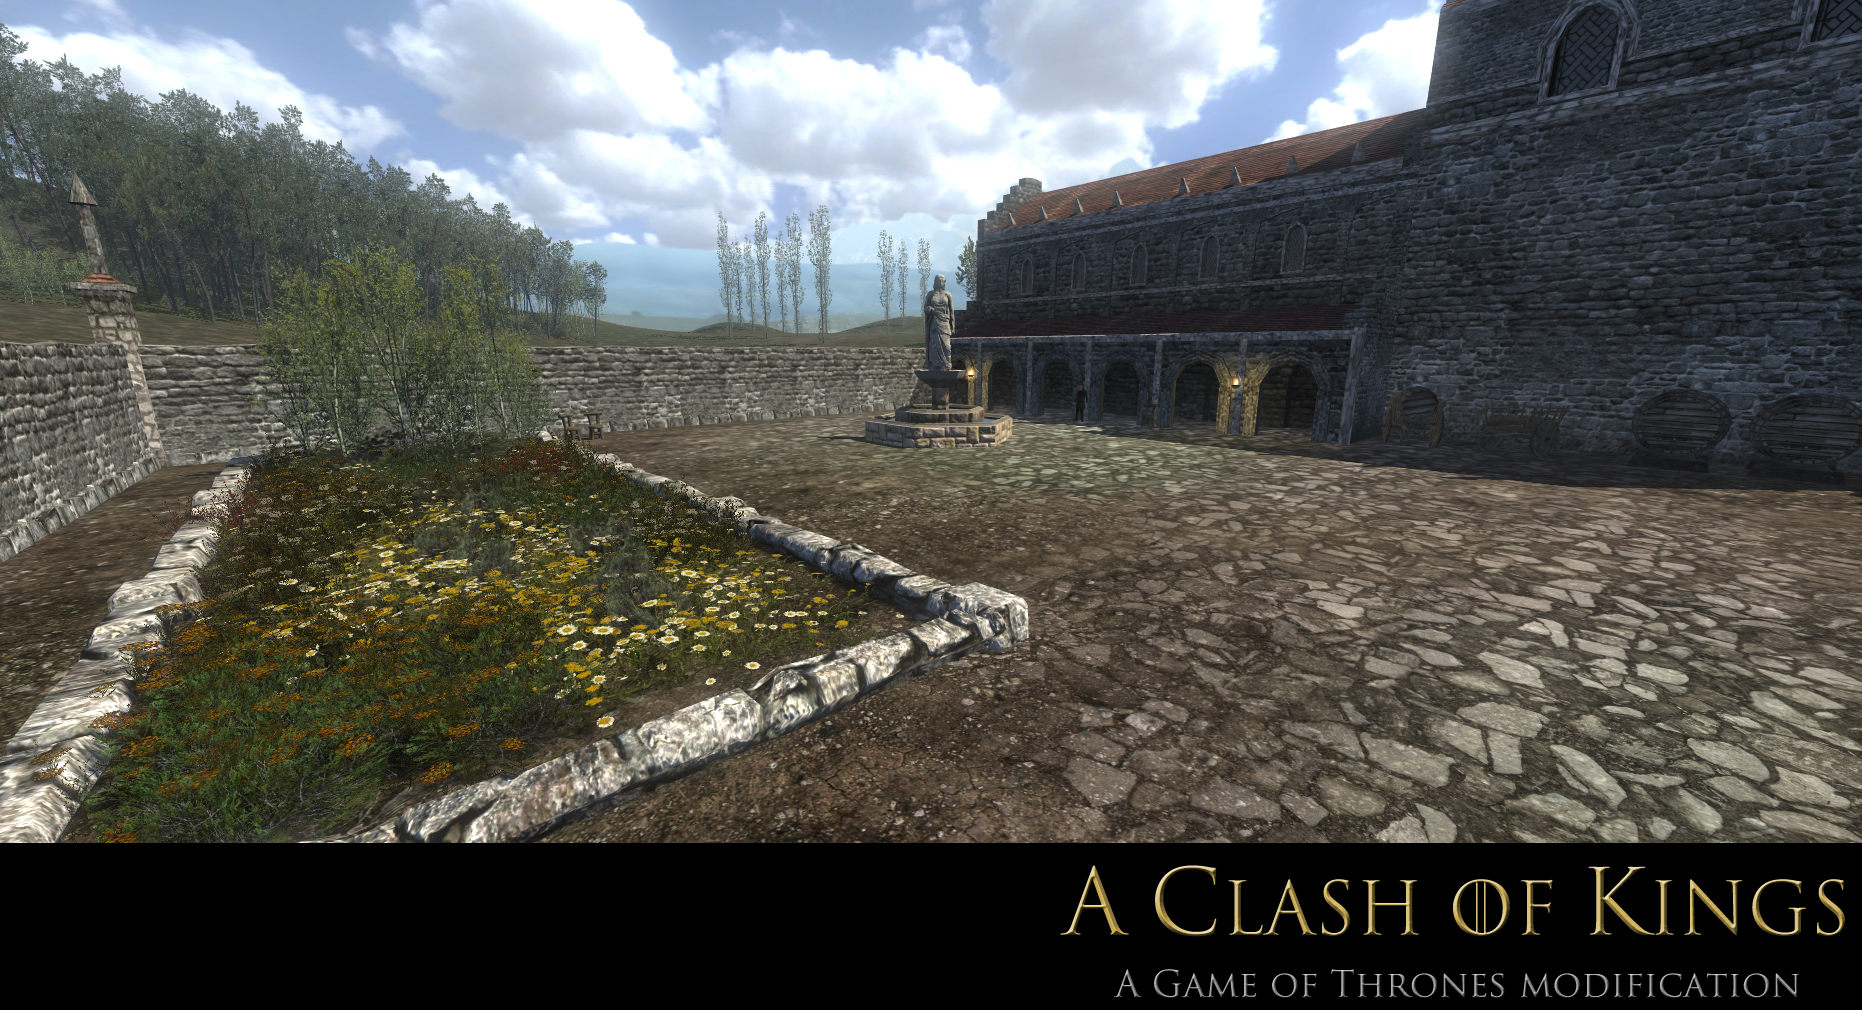 Siege image - A Clash of Kings (Game of Thrones) mod for Mount